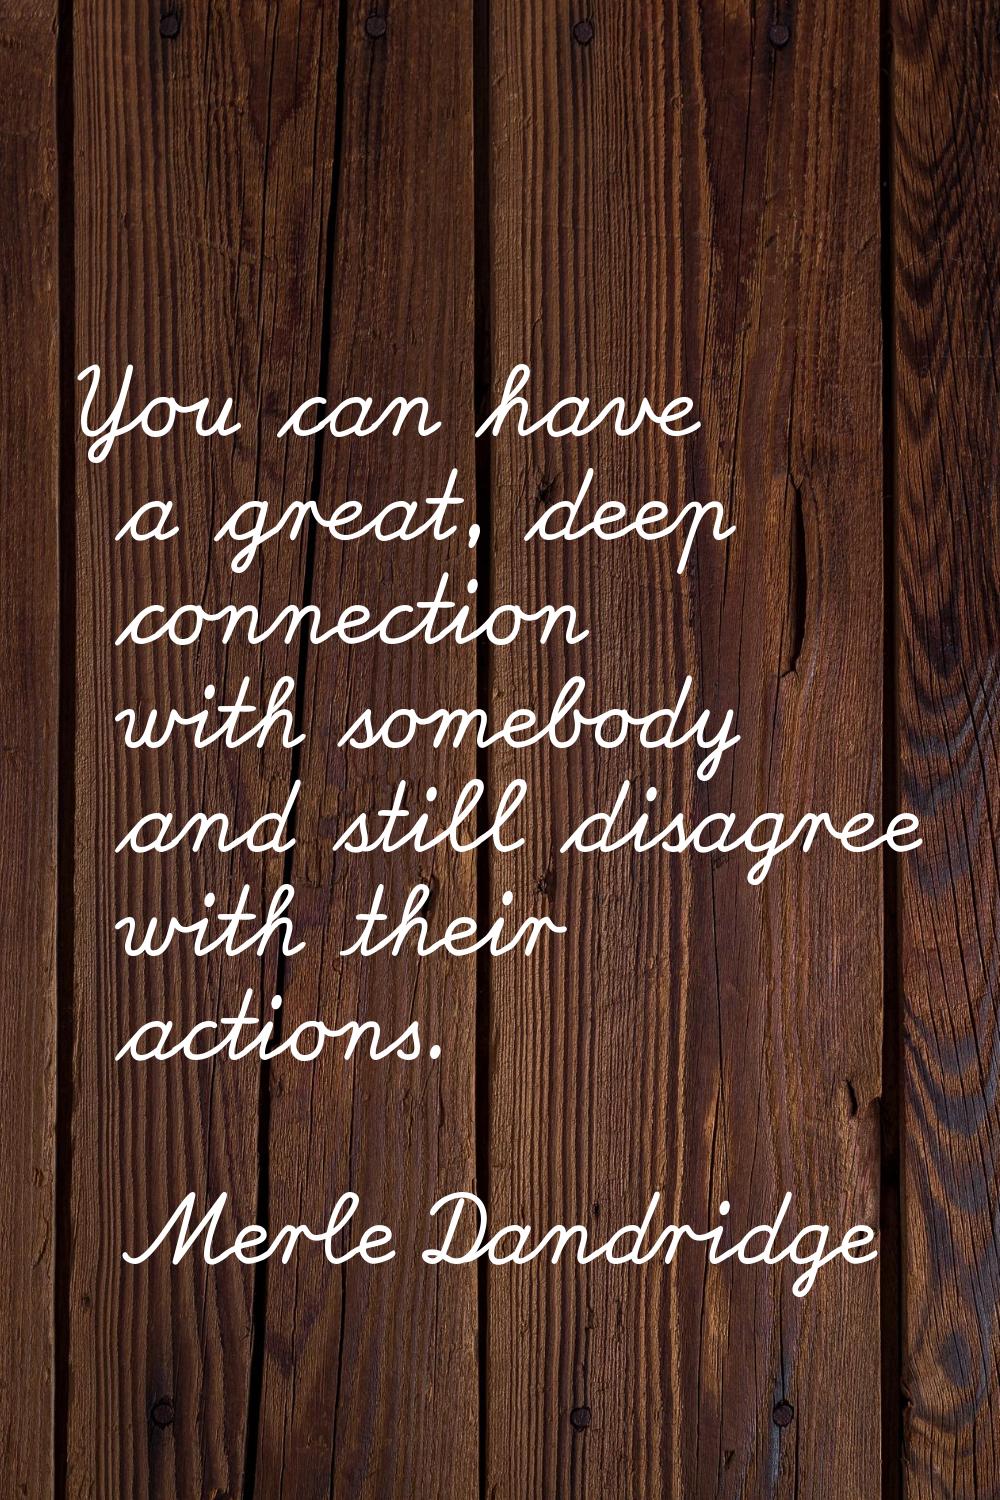 You can have a great, deep connection with somebody and still disagree with their actions.